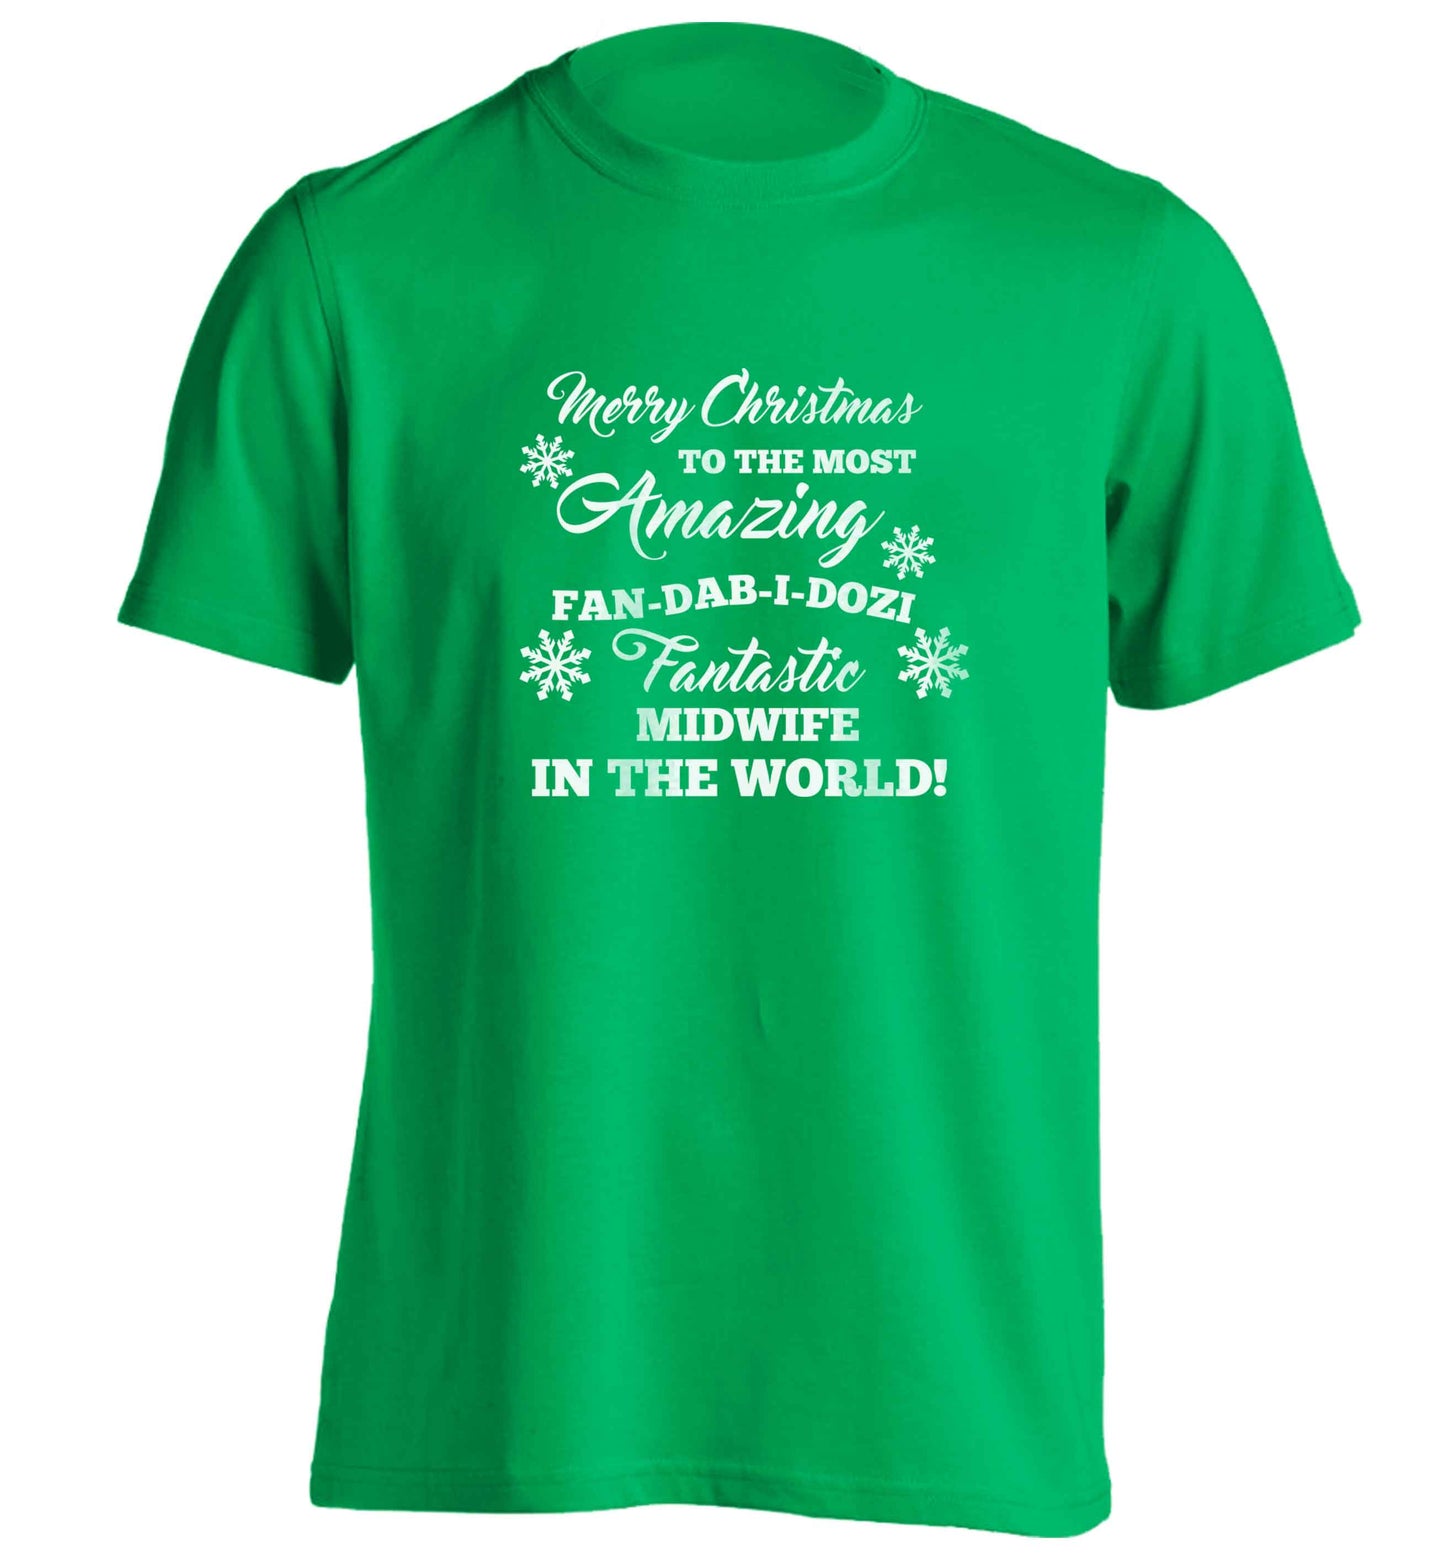 Merry Christmas to the most amazing midwife in the world! adults unisex green Tshirt 2XL